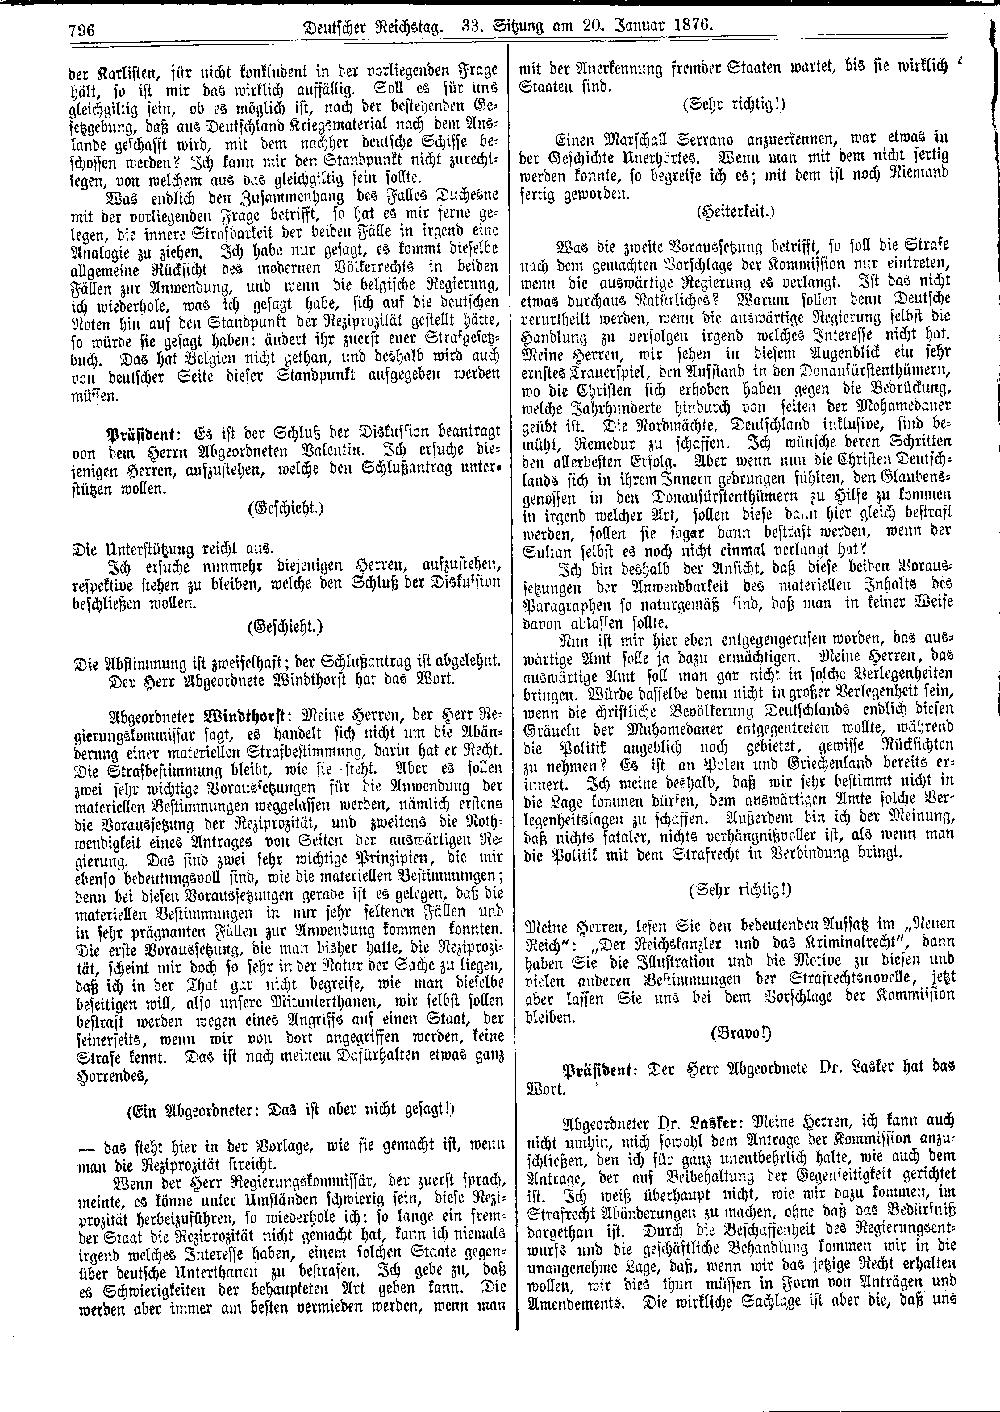 Scan of page 796